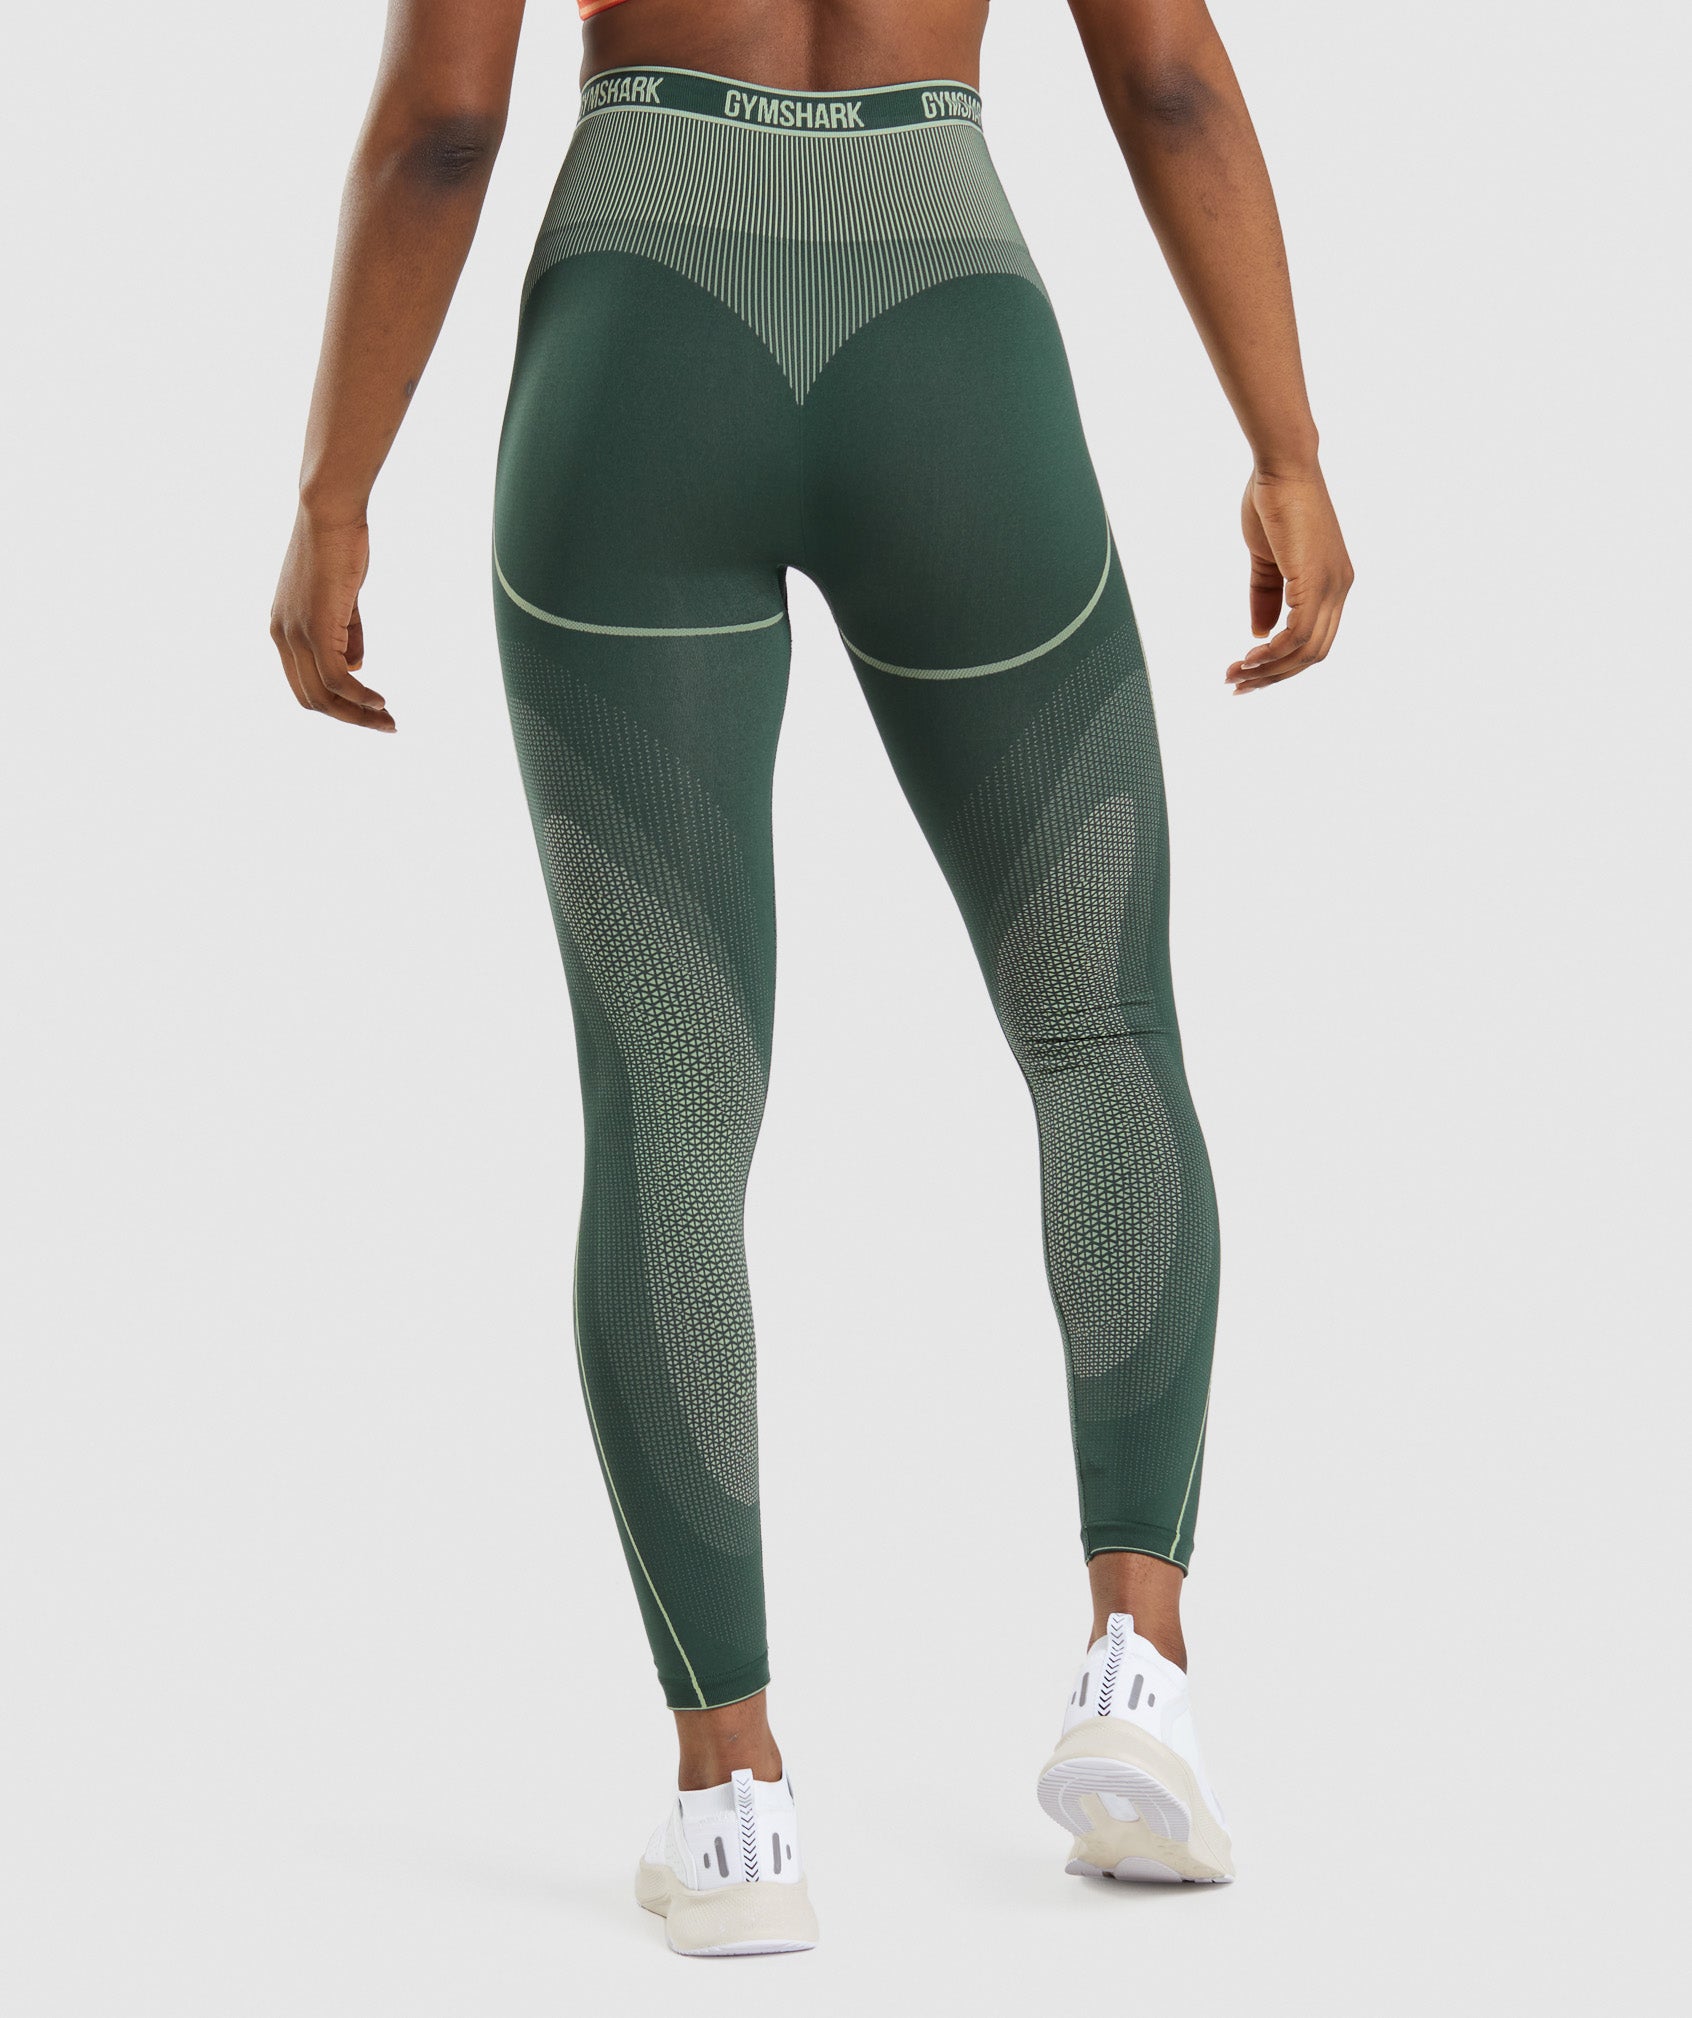 Achieve Your Fitness Goals with Gymshark Apex Leggings